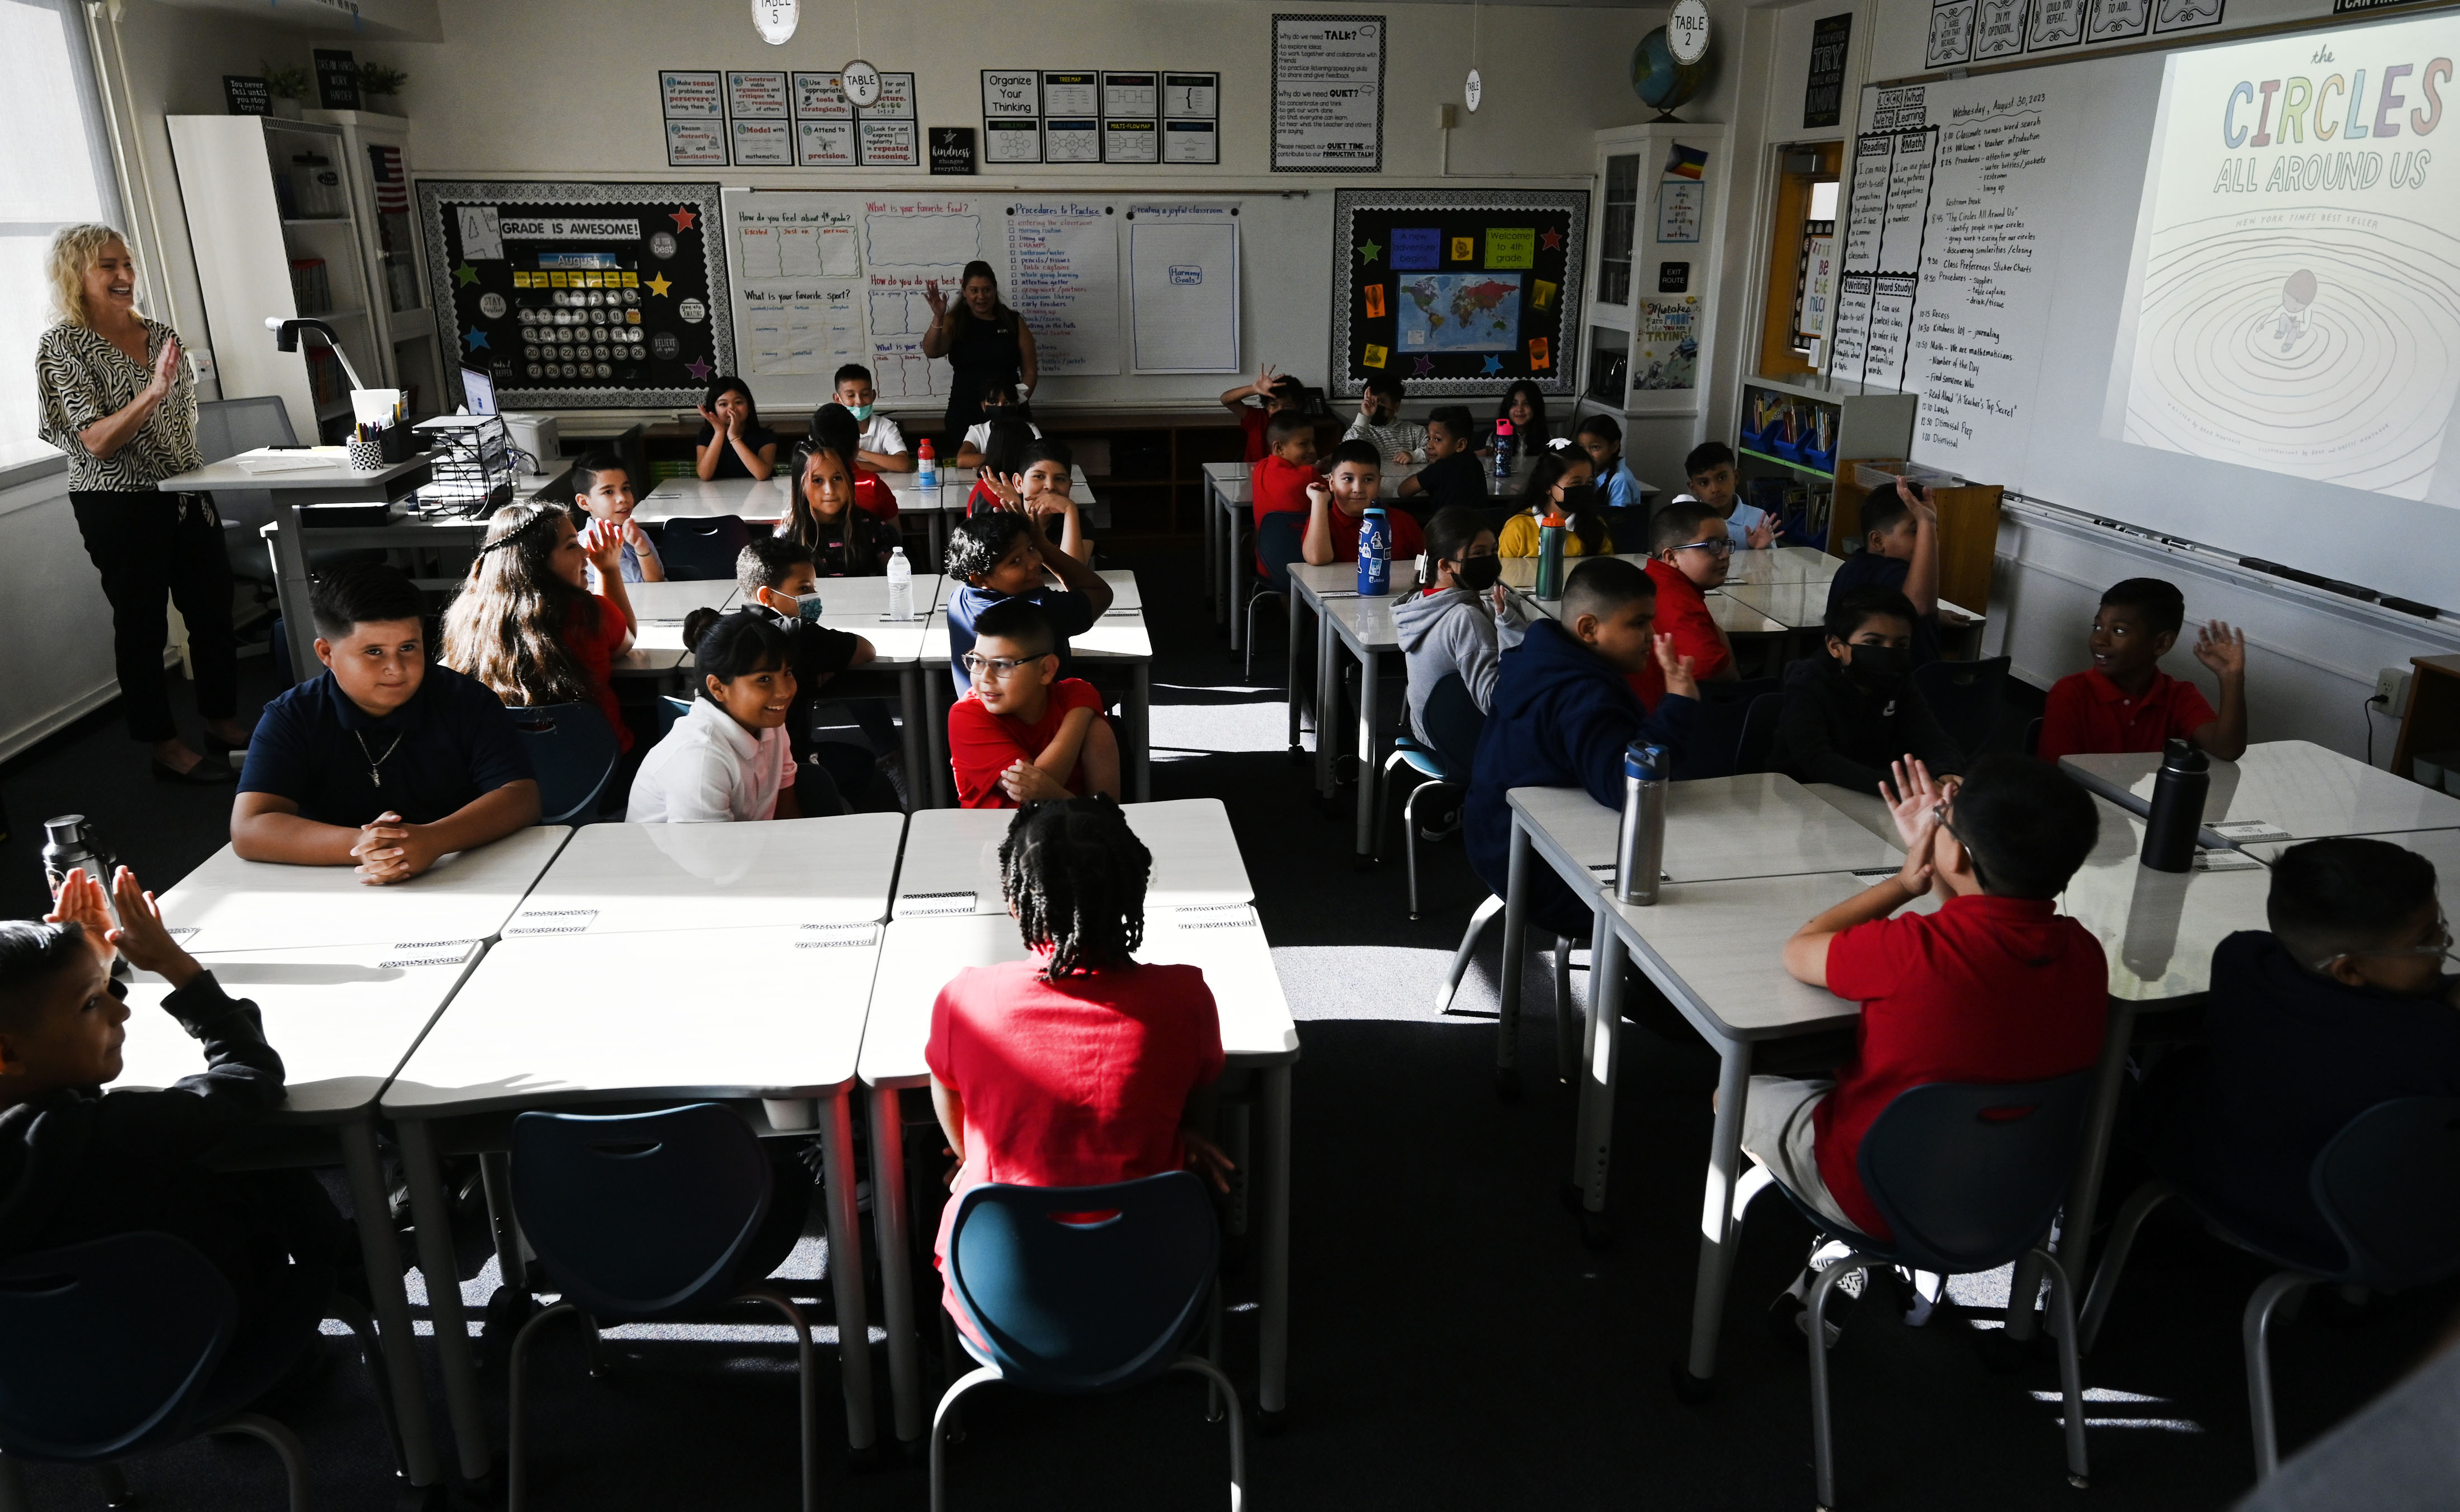 Young students sit at white desks in a classroom while a teacher gives instructions from one side of the room.